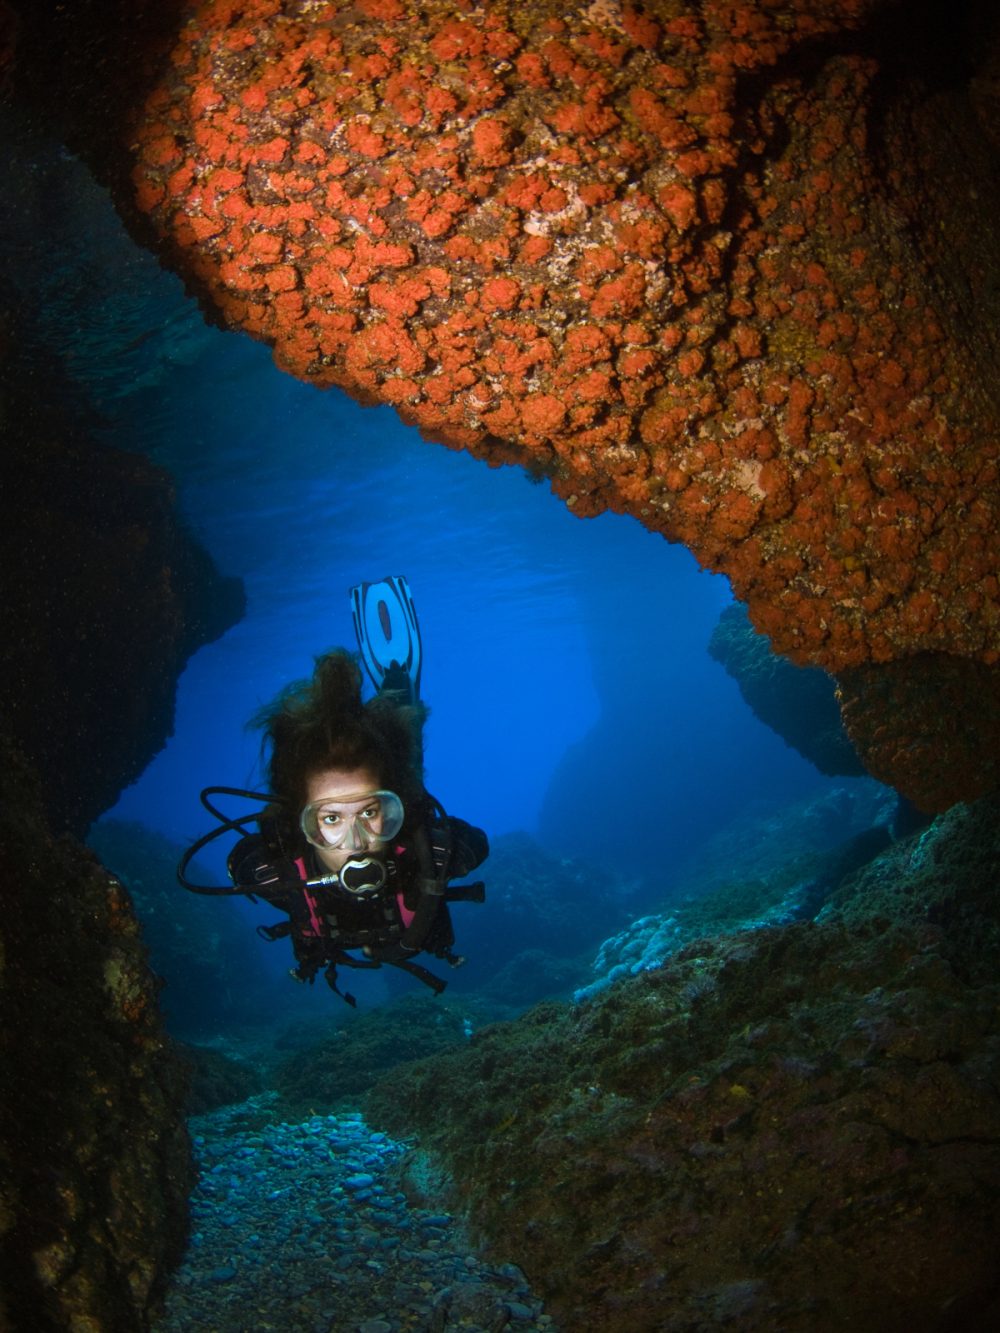 Young girl doing scuba-diving and exploring an underwater cave with walls covered by orange coral.